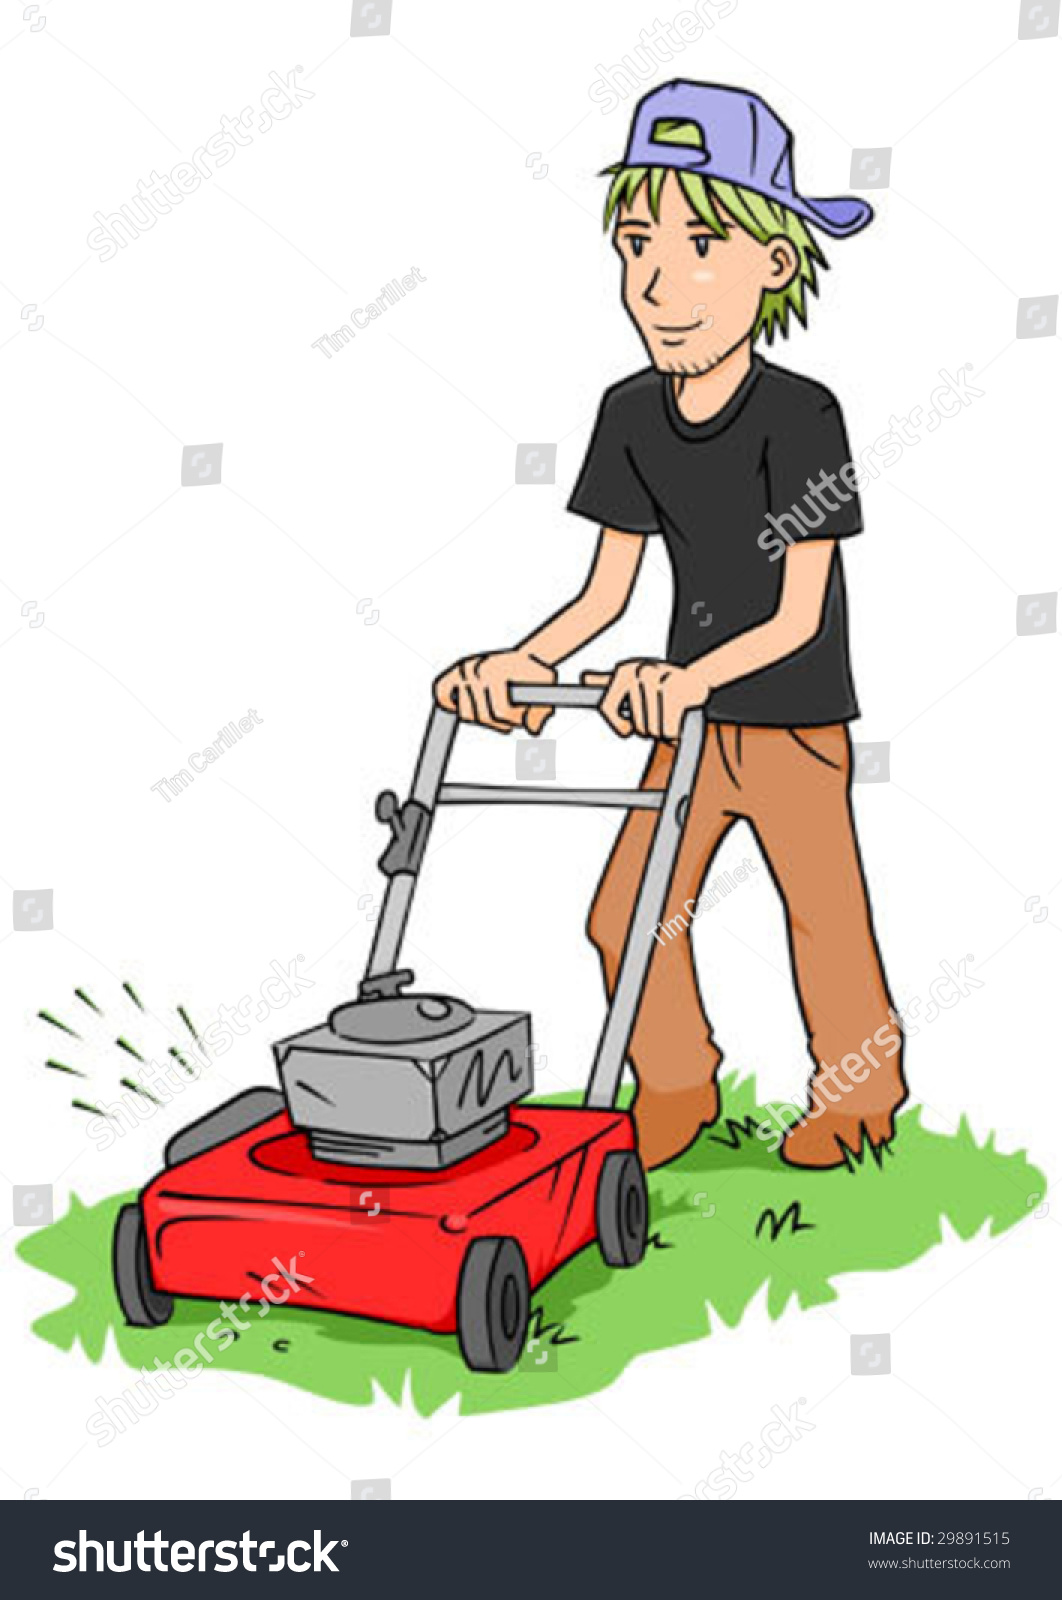 A Young Man Cutting Grass With A Push Lawn Mower. Stock Vector